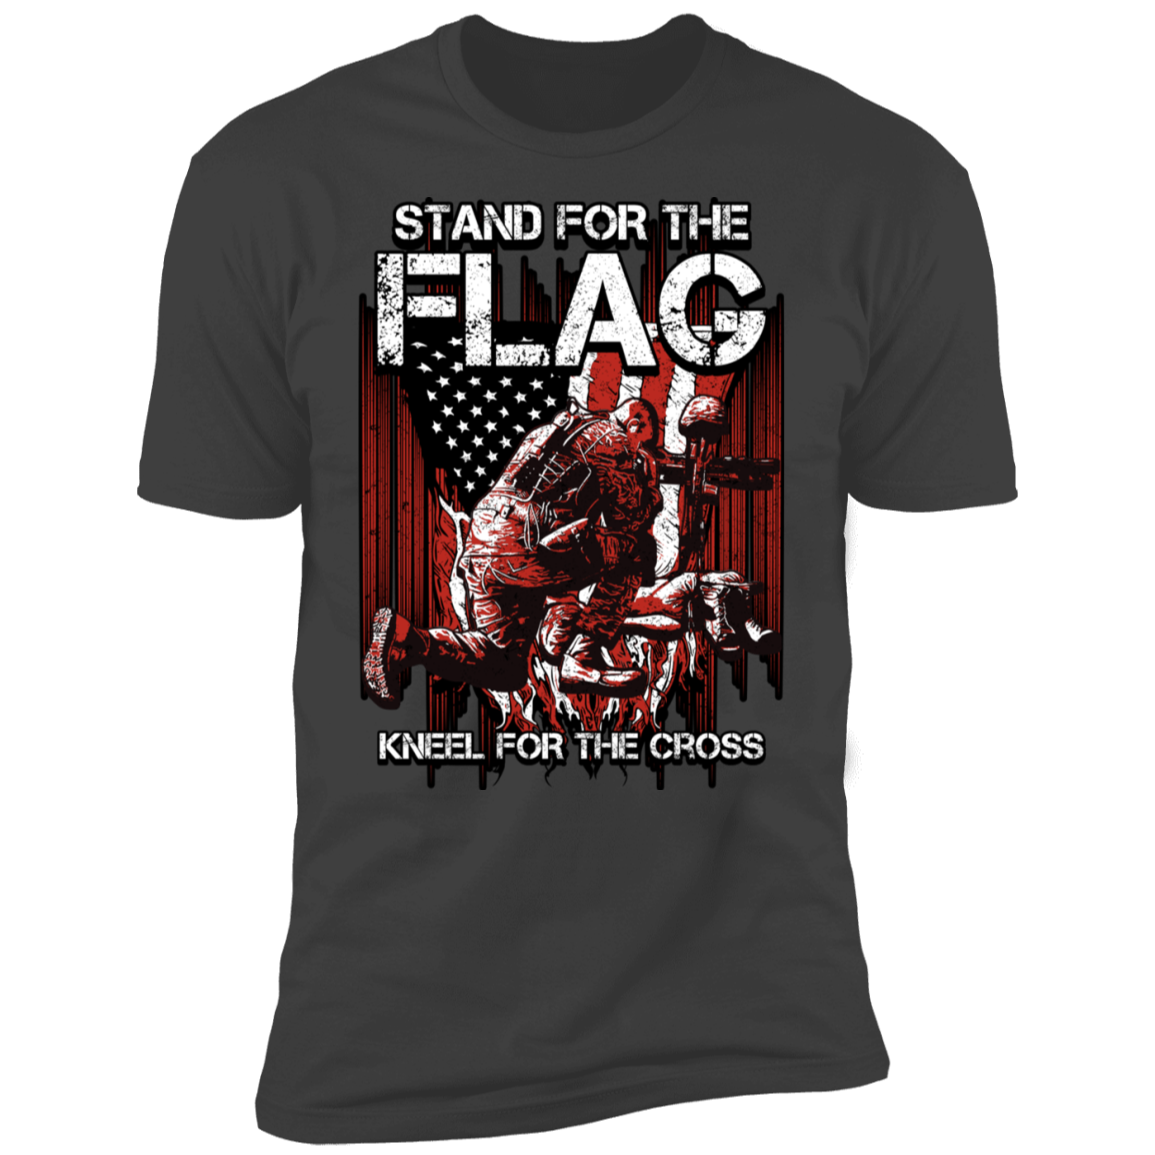 Stand For the Flag - Premium Short sleeve